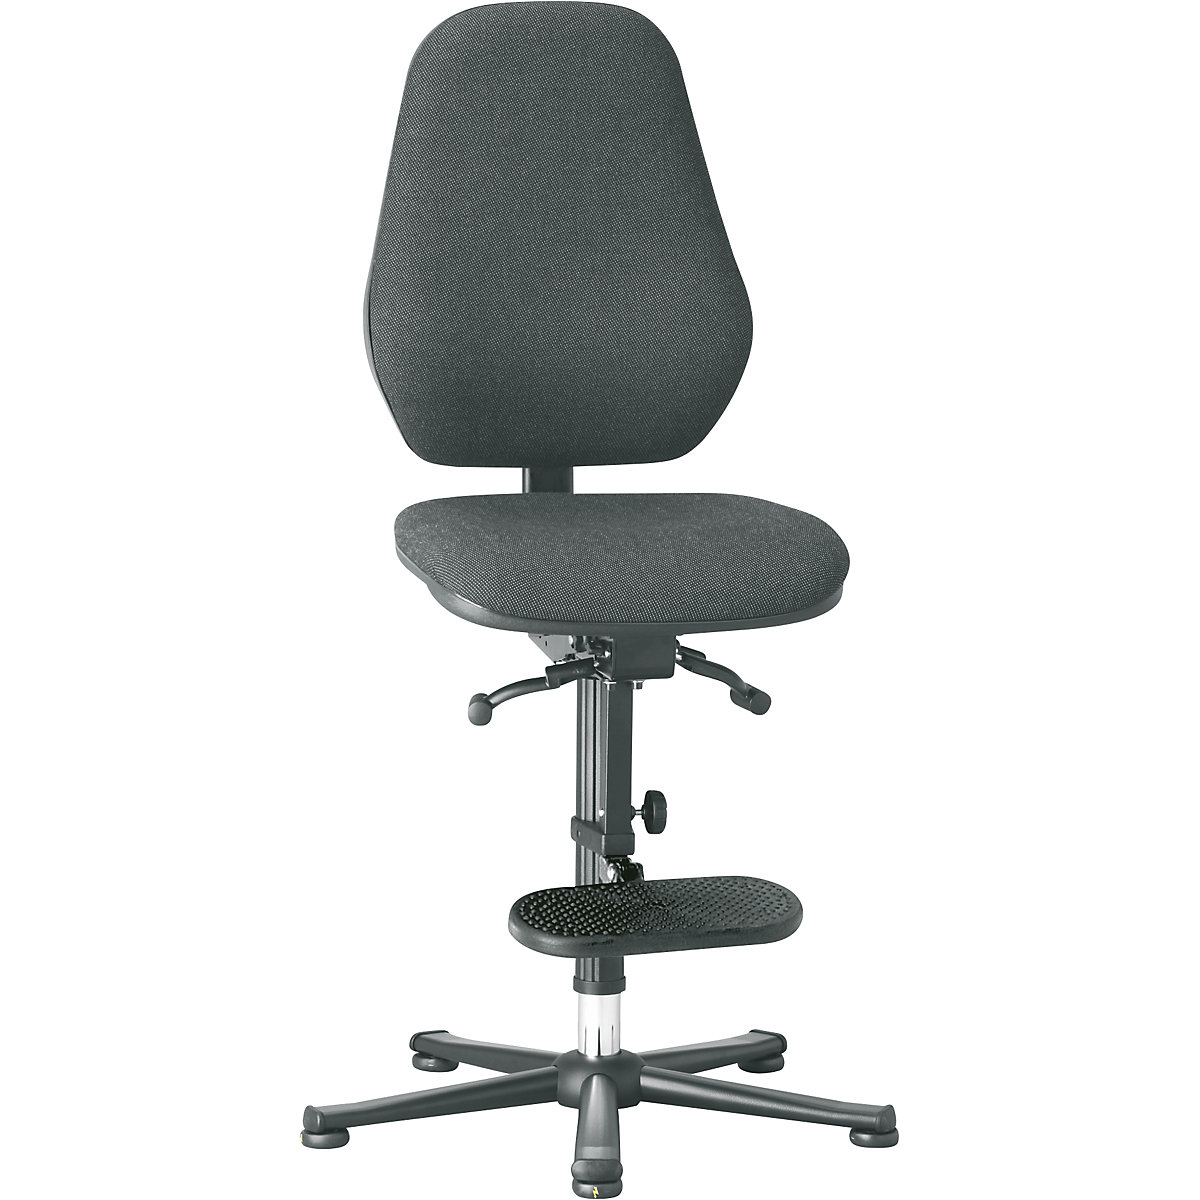 Industrial swivel chair – bimos, with ESD protection, gas spring, floor glides, step-up, black fabric covering-11